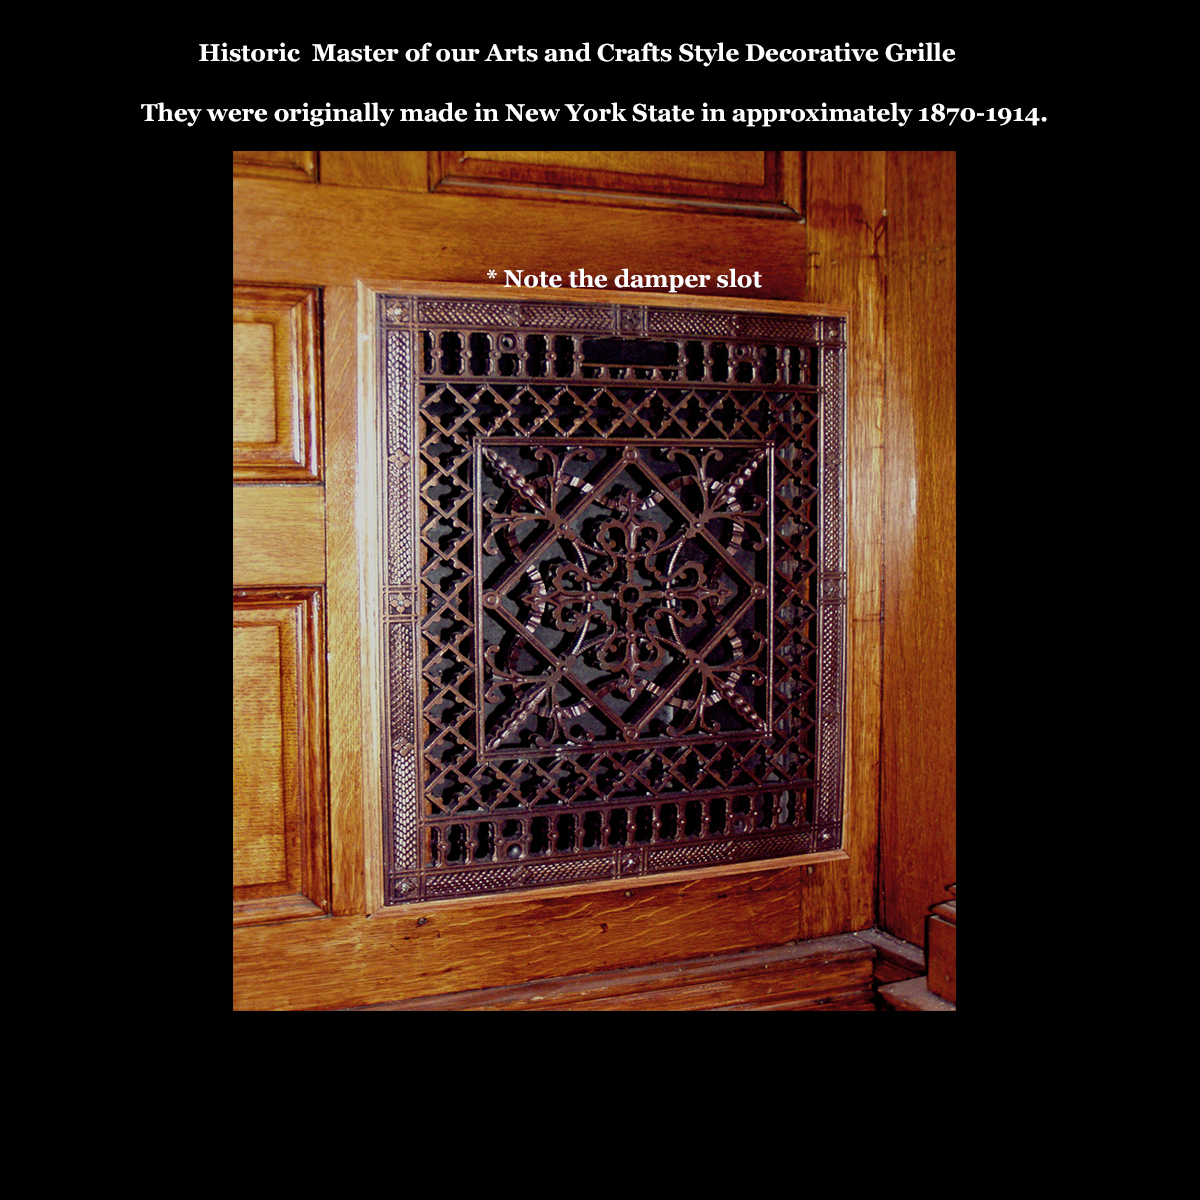 Arts and Crafts historical grille design